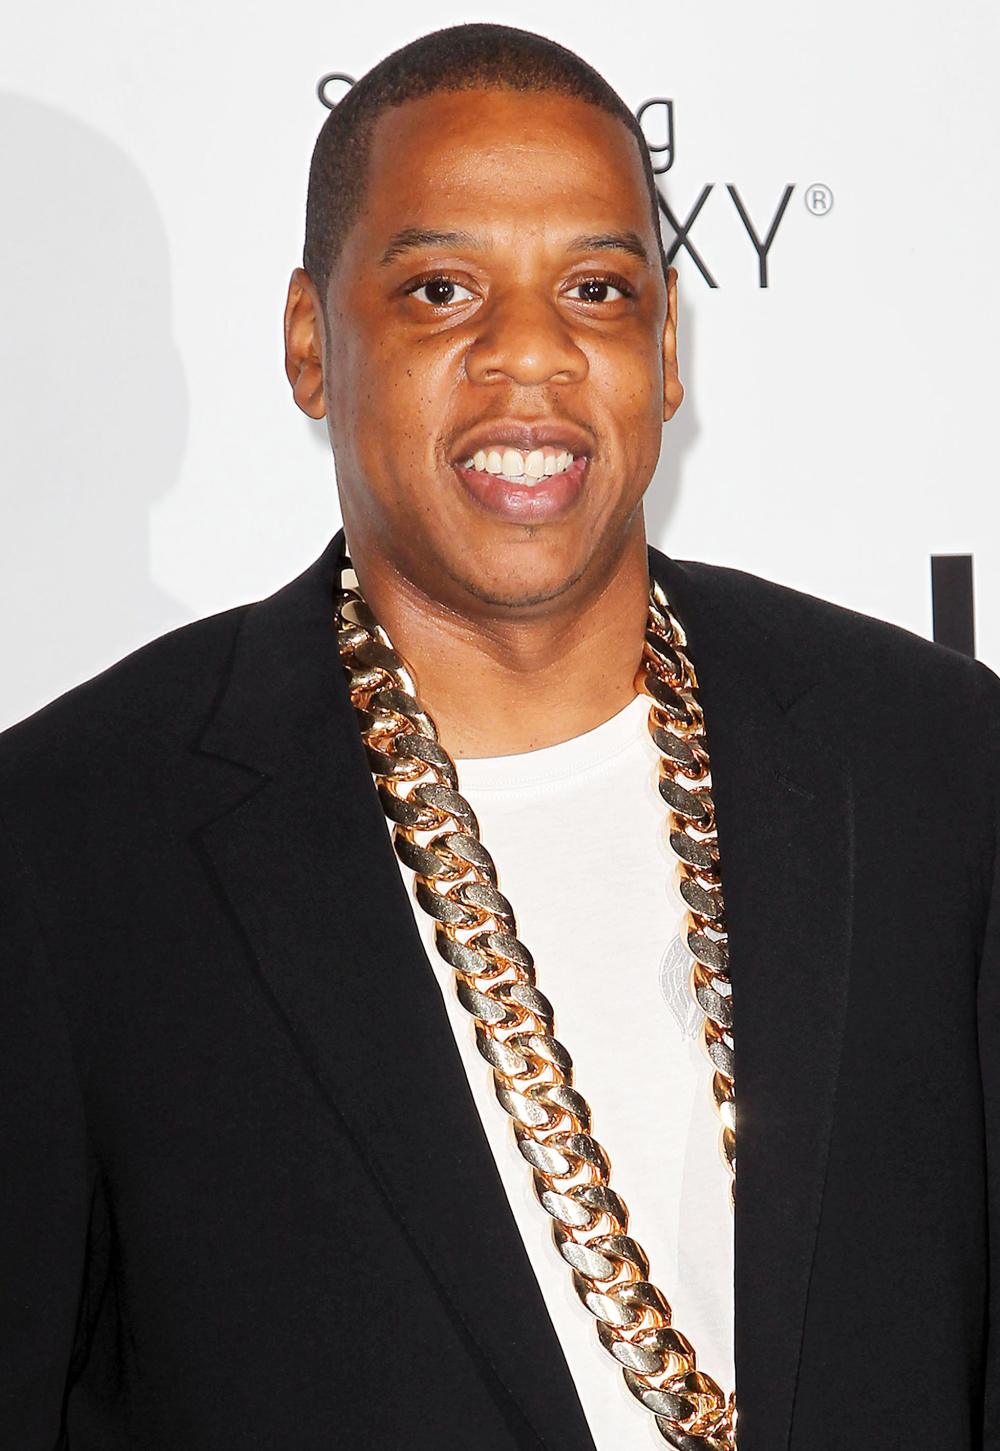 Jay-Z Gives Out Rolex Watches as VIP Passes